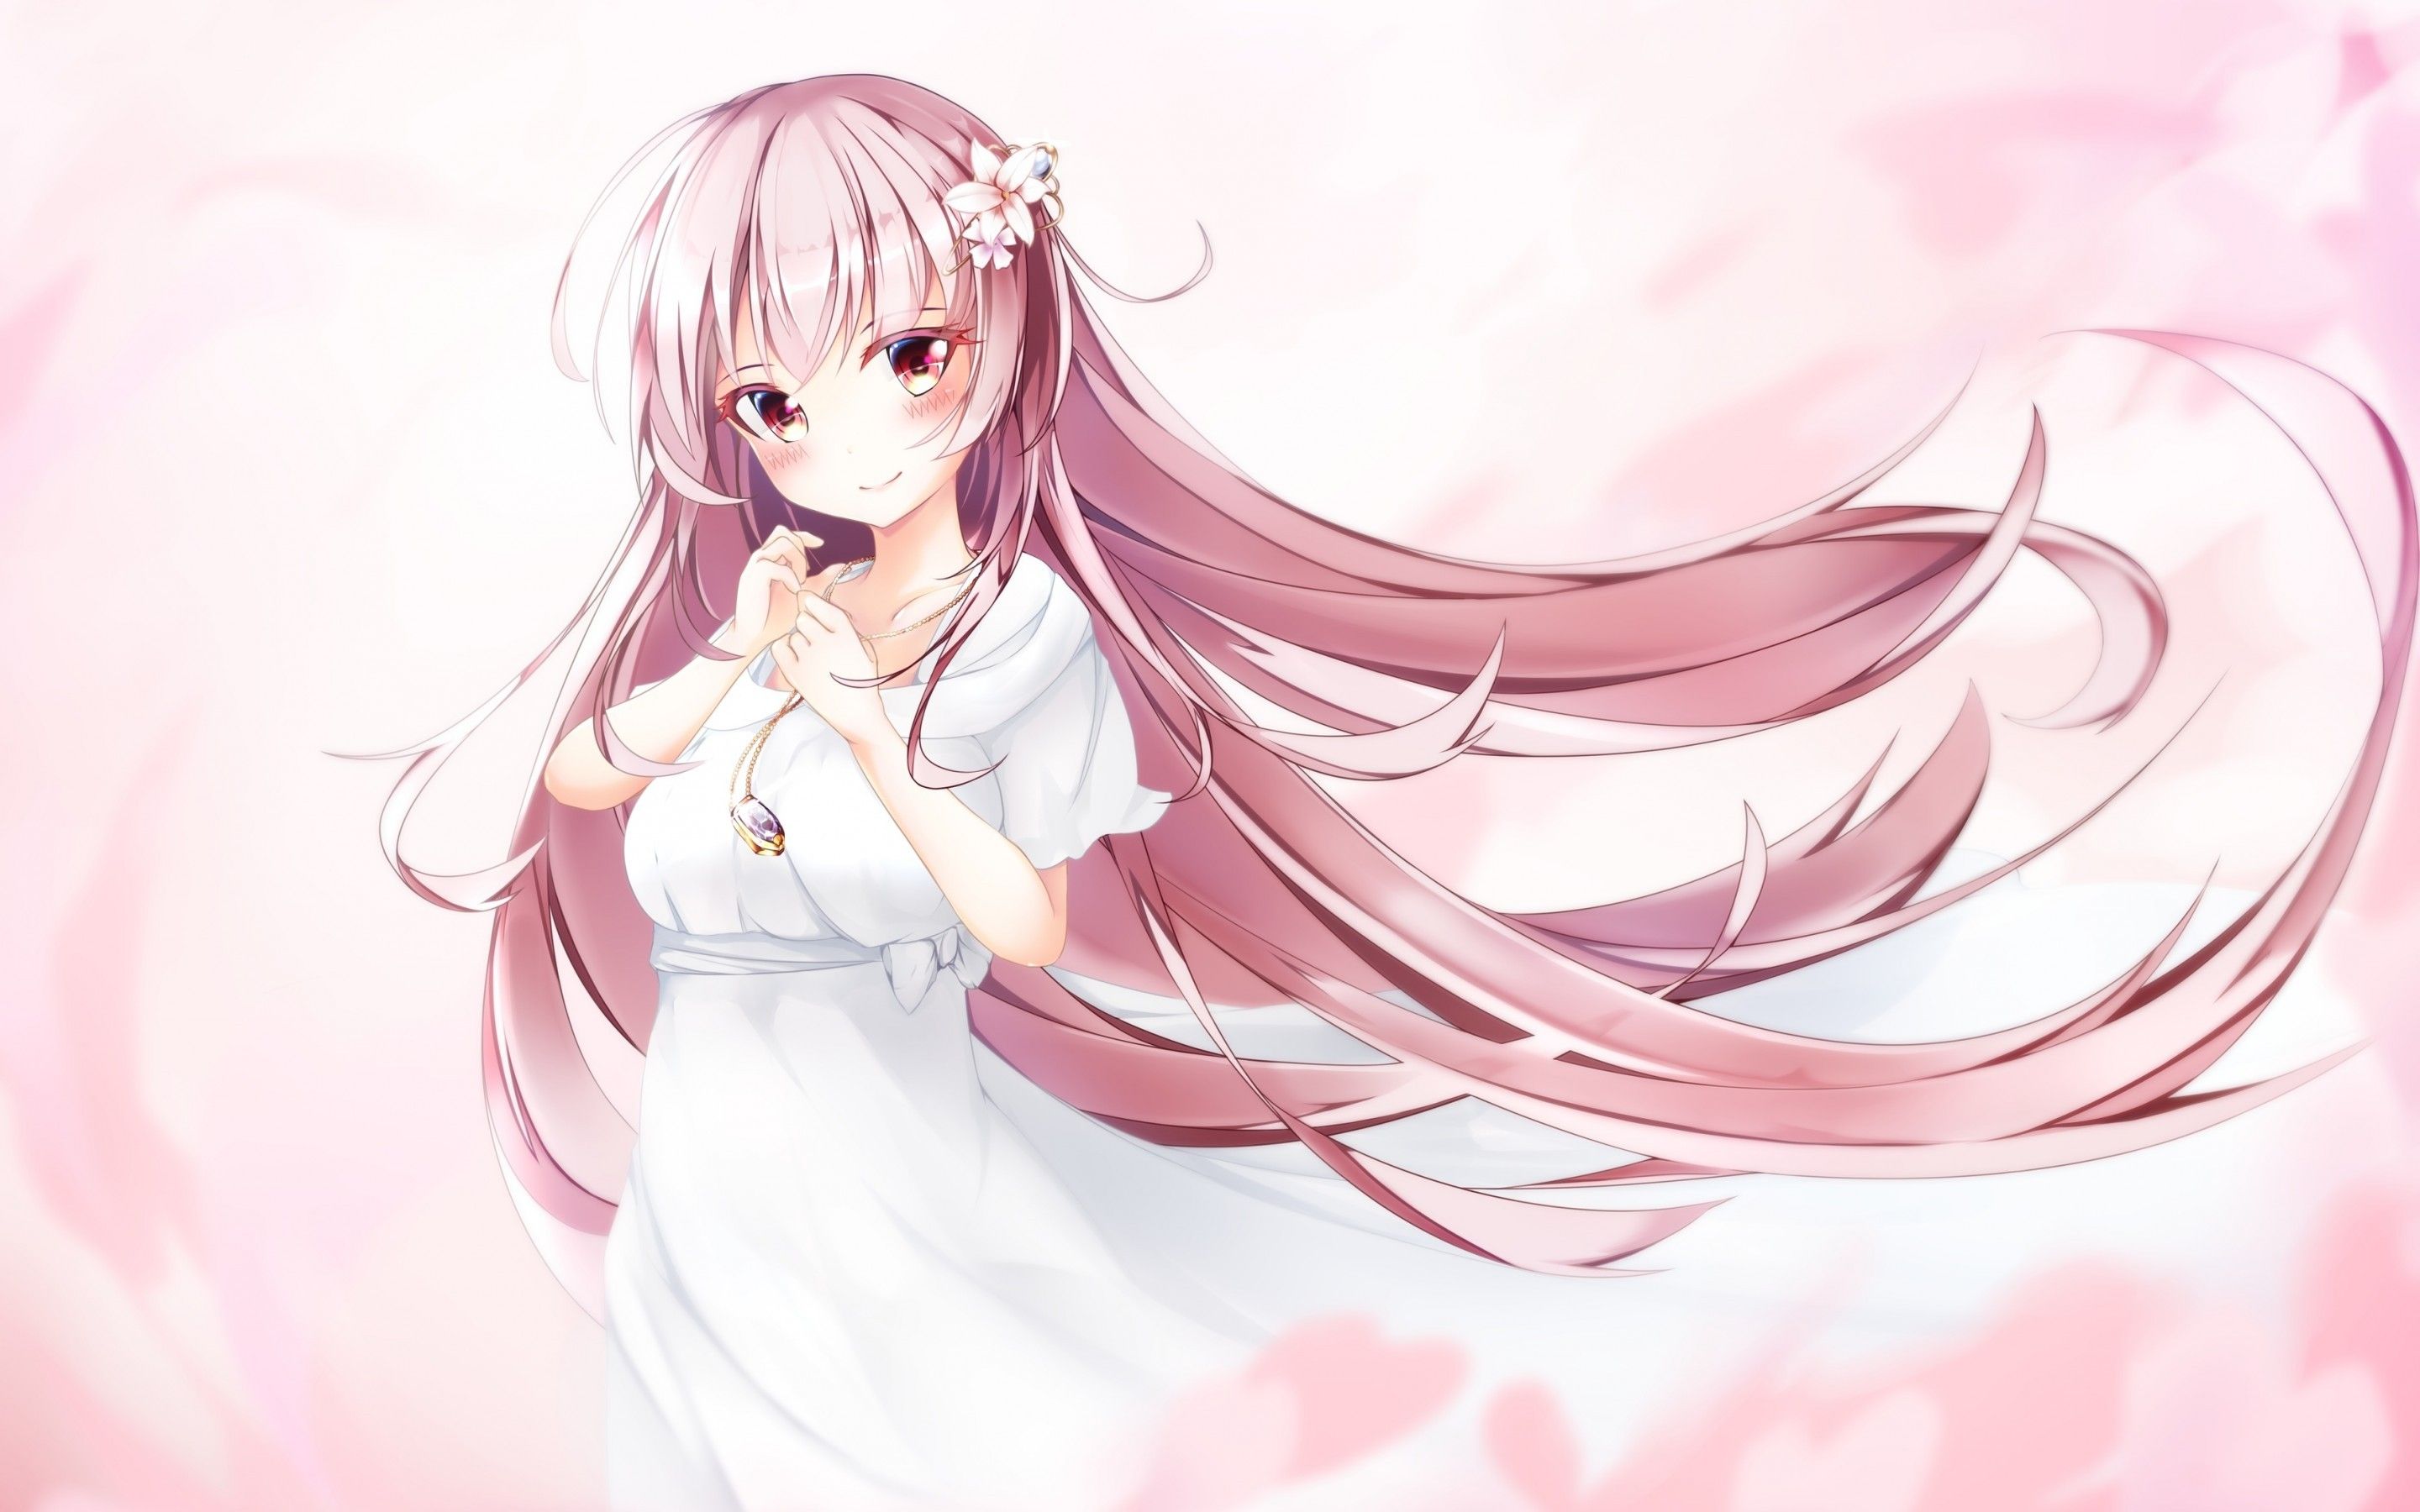 Download 2880x1800 Anime Girl, Pink Hair, Smiling, White Dress, Necklace Wallpaper for MacBook Pro 15 inch